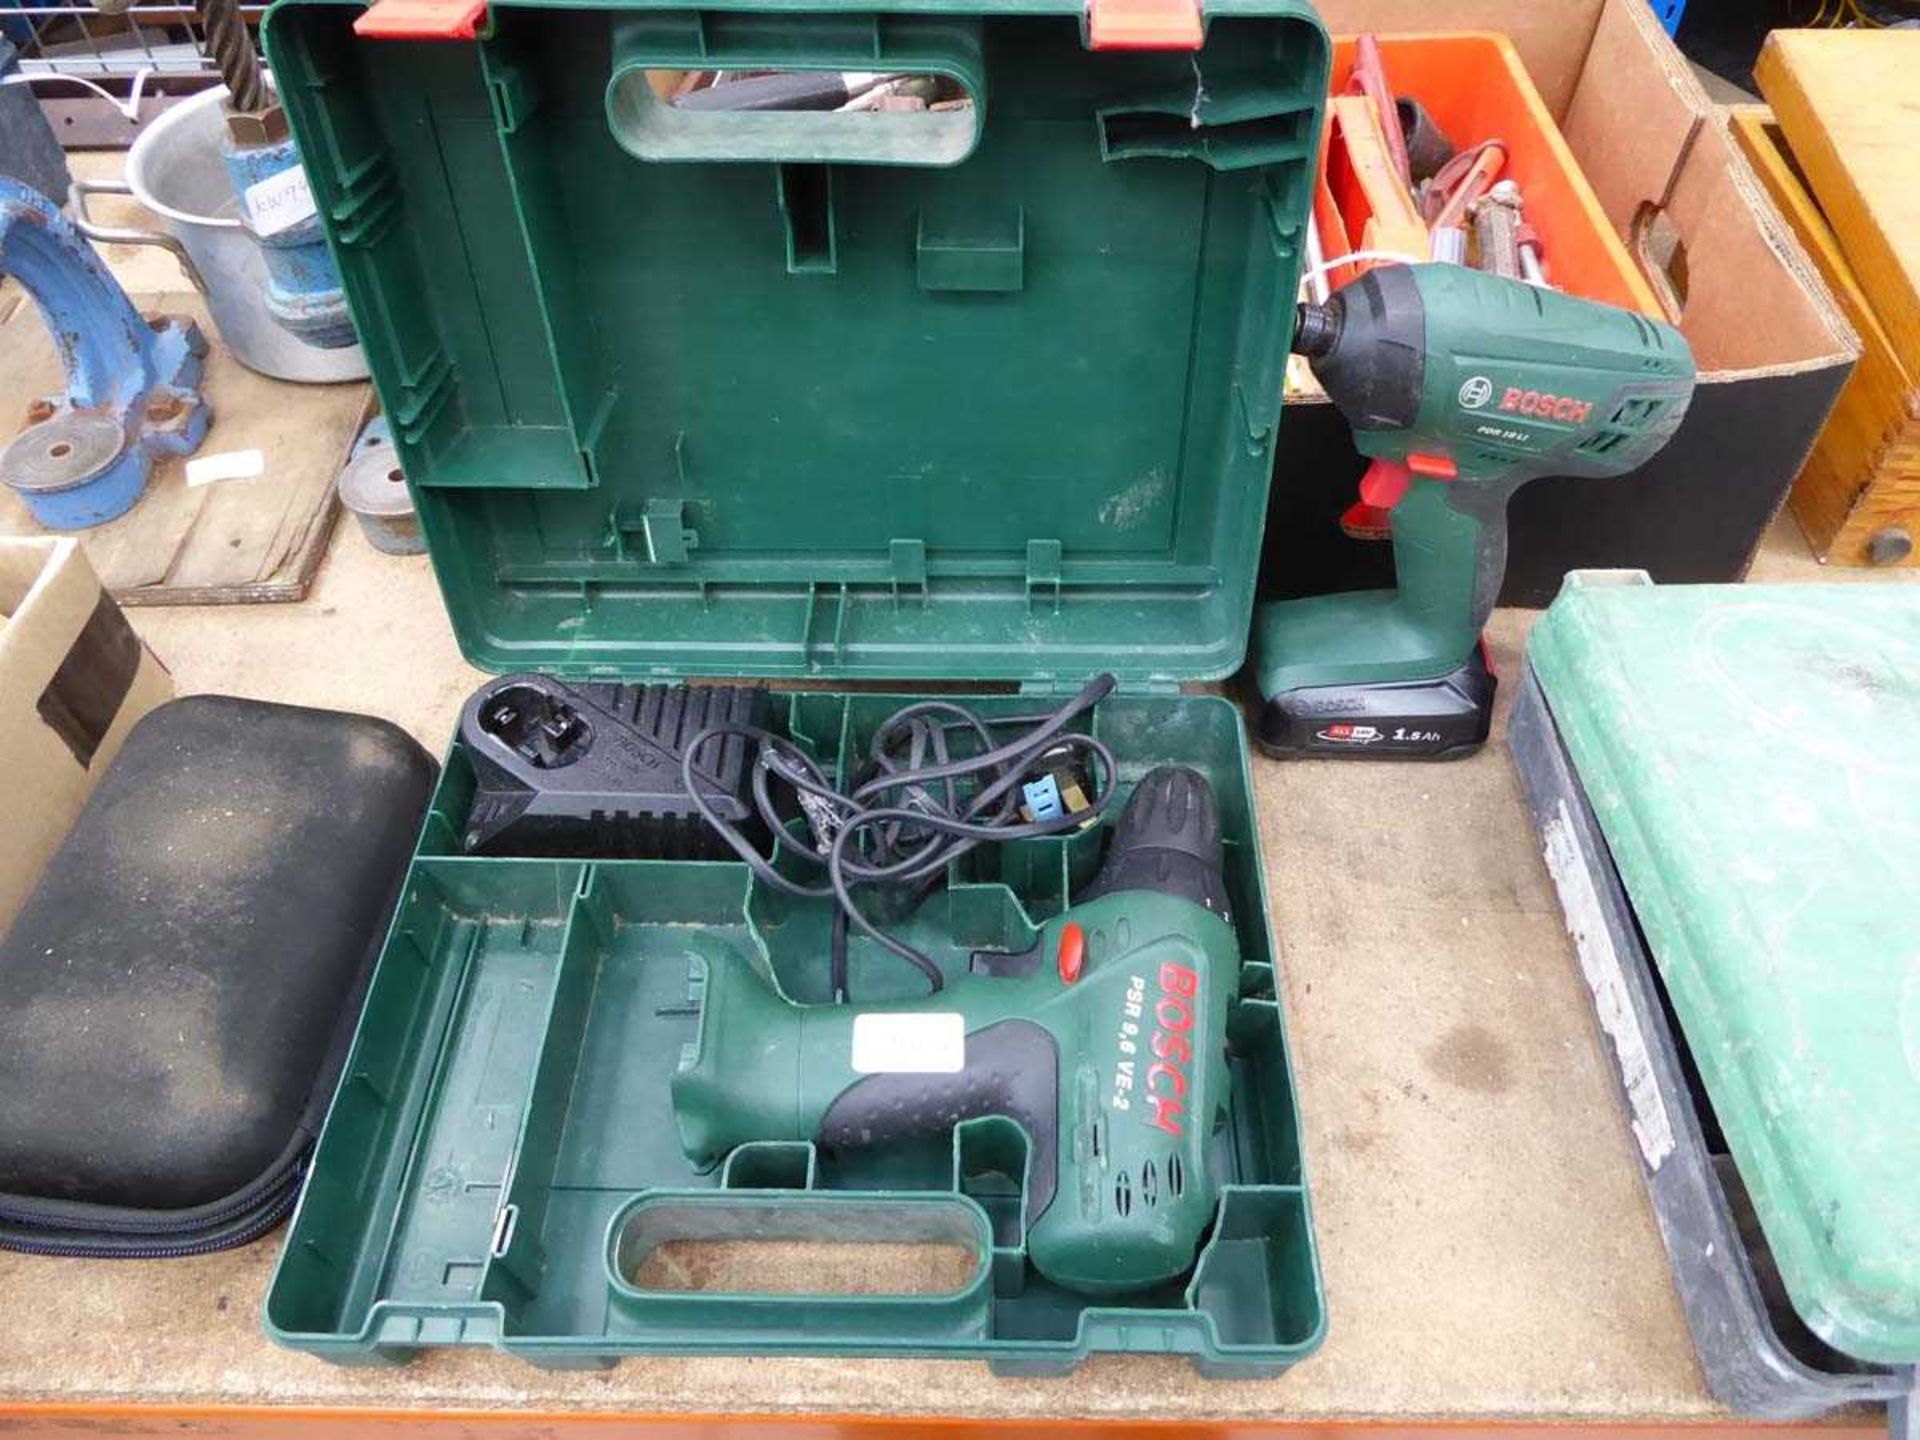 Bosch battery drill with charger, no batteries, and a small impact drive with battery, no charger